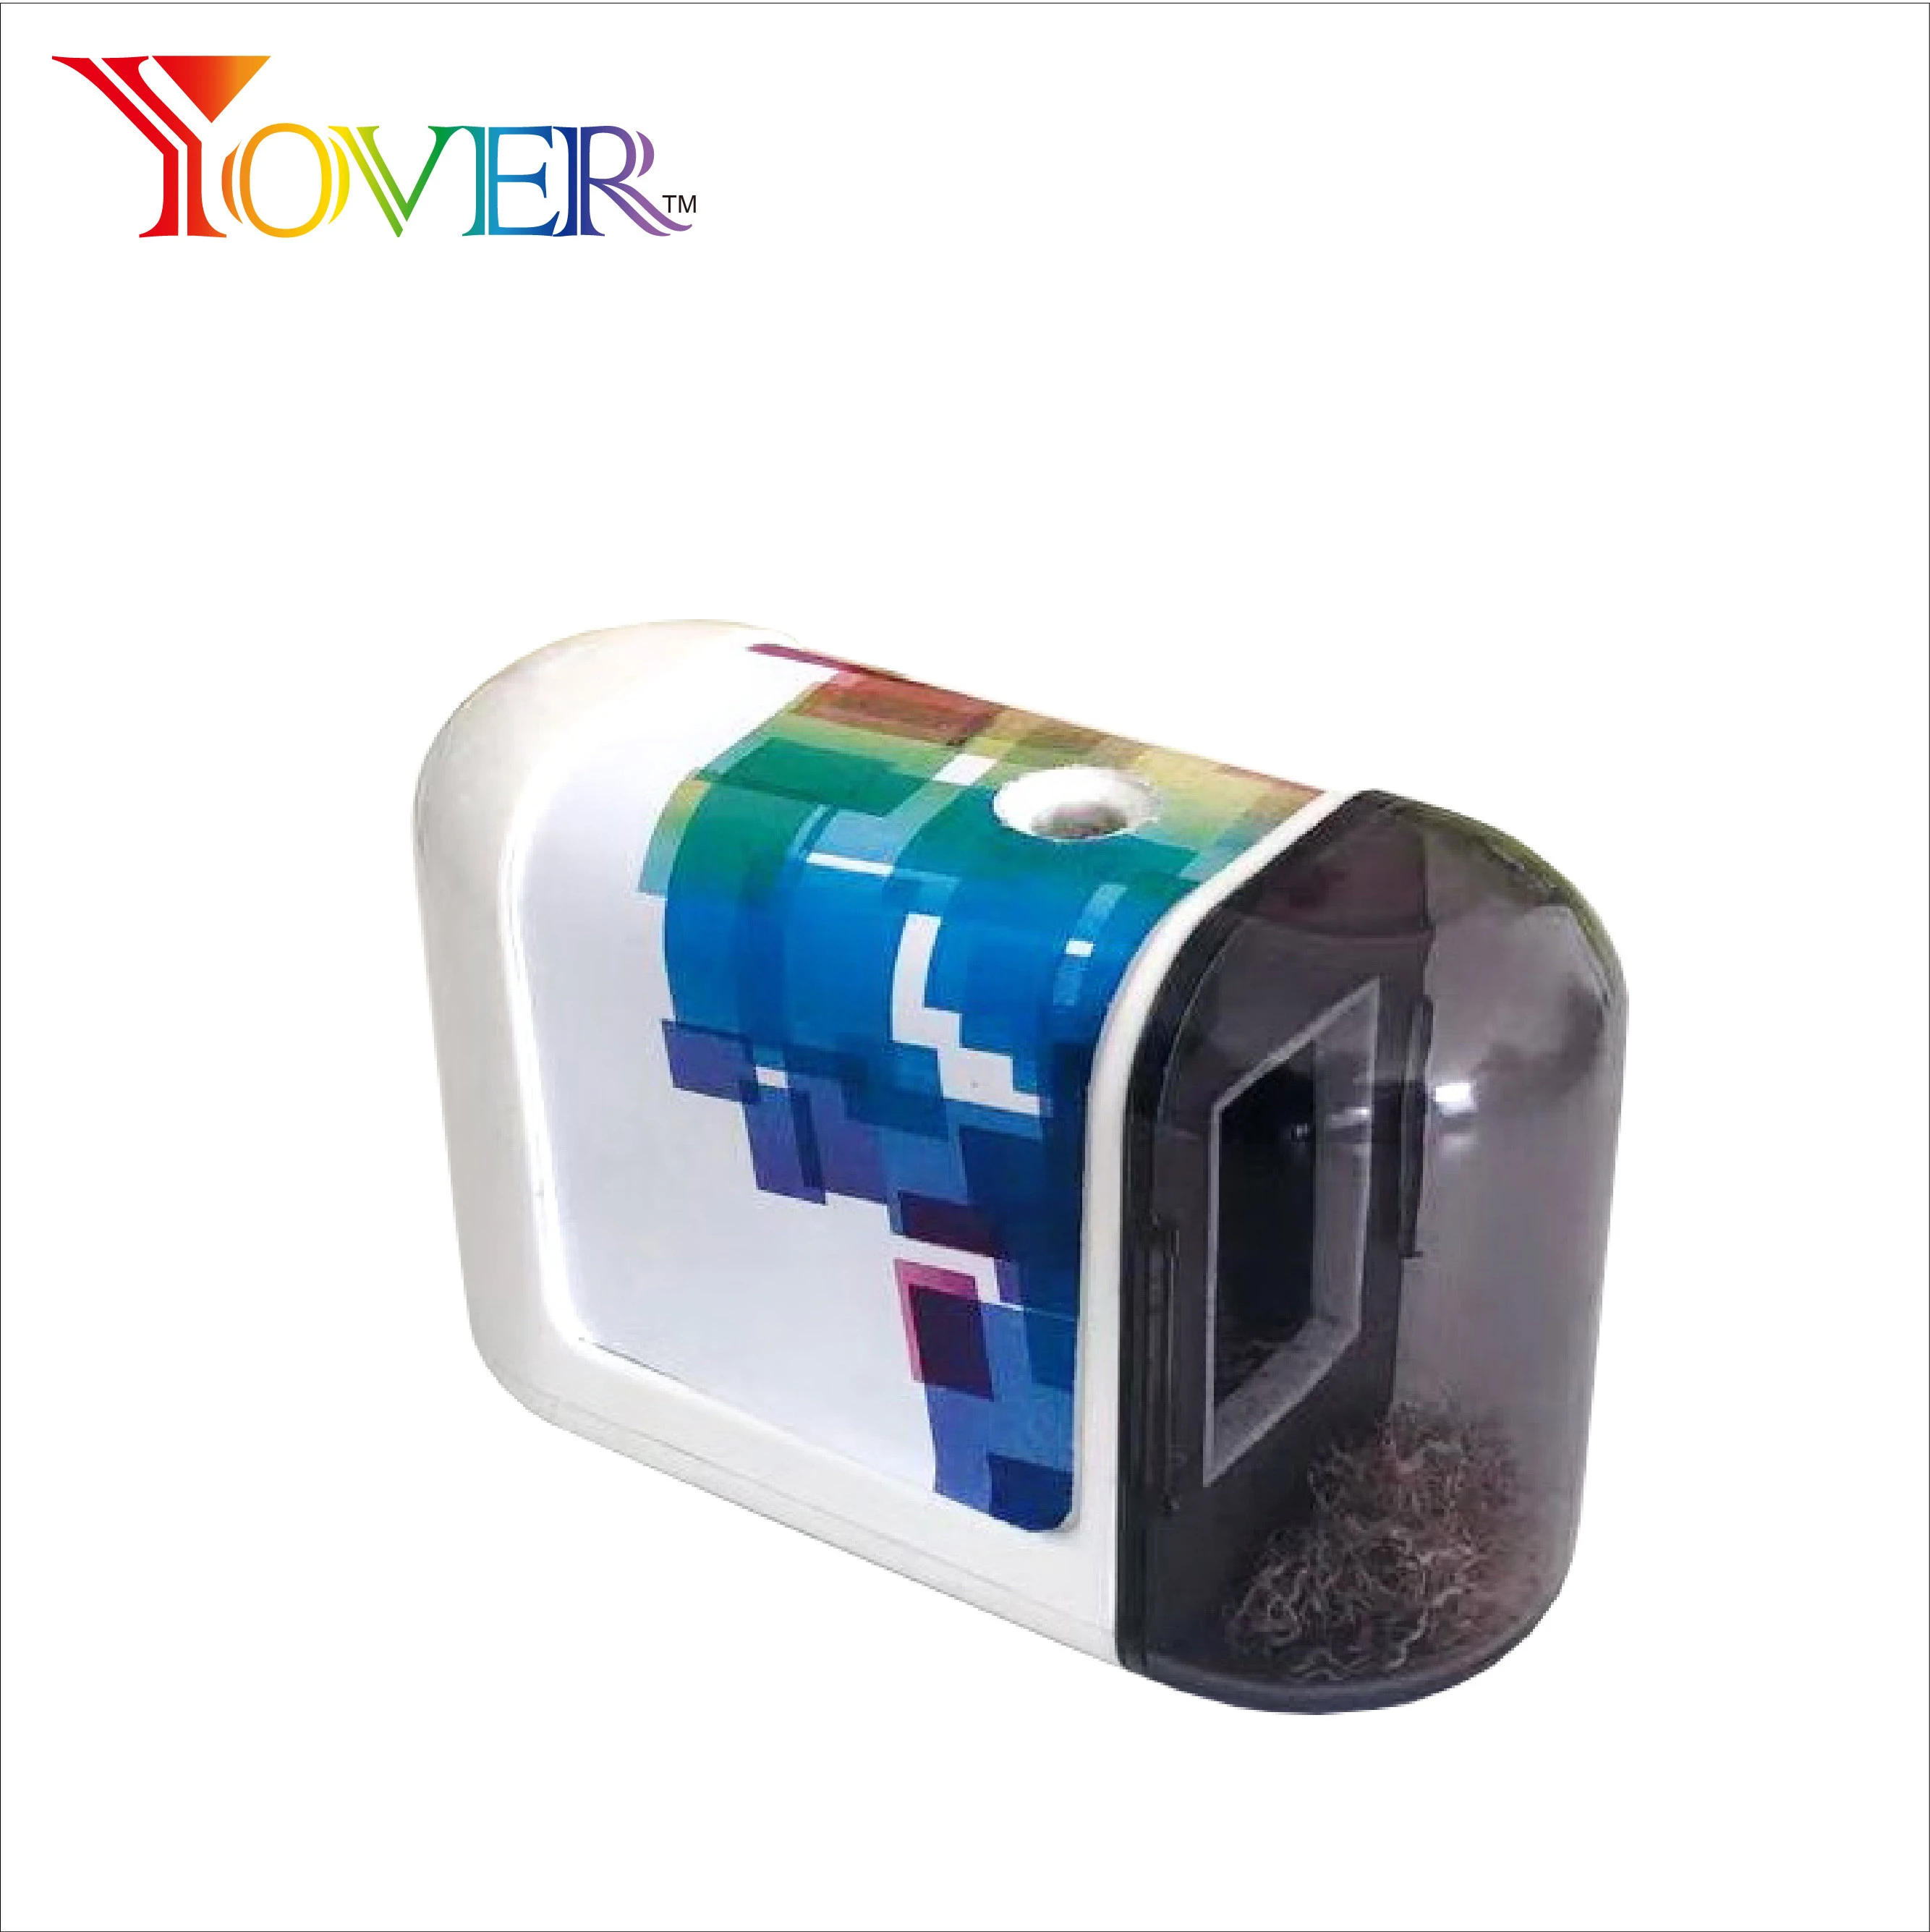 PowerMe Electric Pencil Sharpener for Home Office  School Artist Students